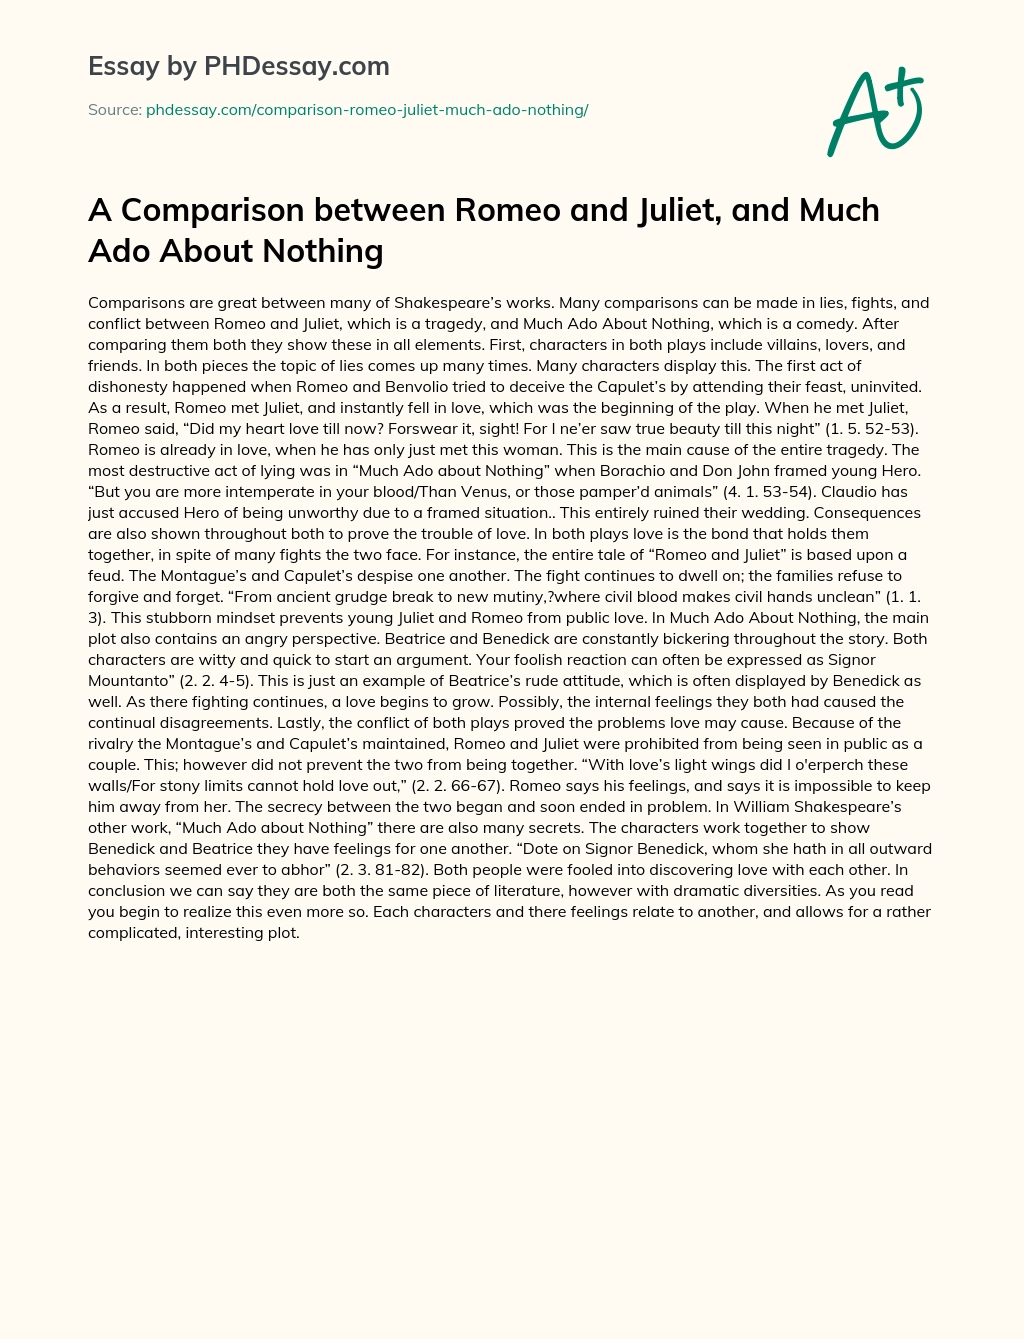 A Comparison between Romeo and Juliet, and Much Ado About Nothing essay